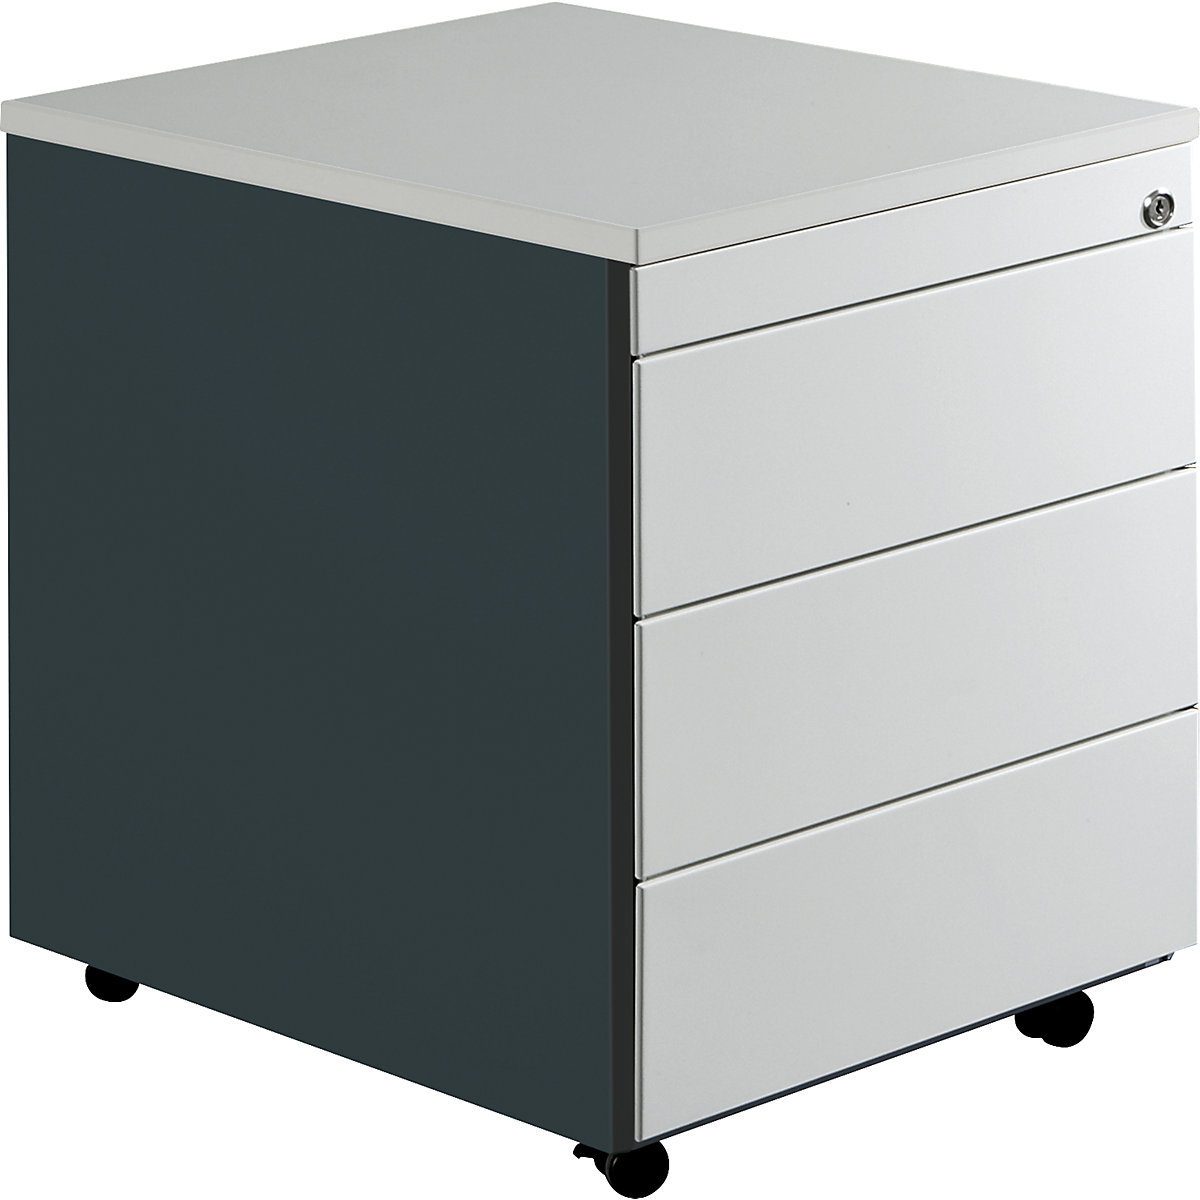 Drawer pedestal with castors – mauser, HxD 579 x 600 mm, plastic top, 3 drawers, charcoal / light grey / light grey-2